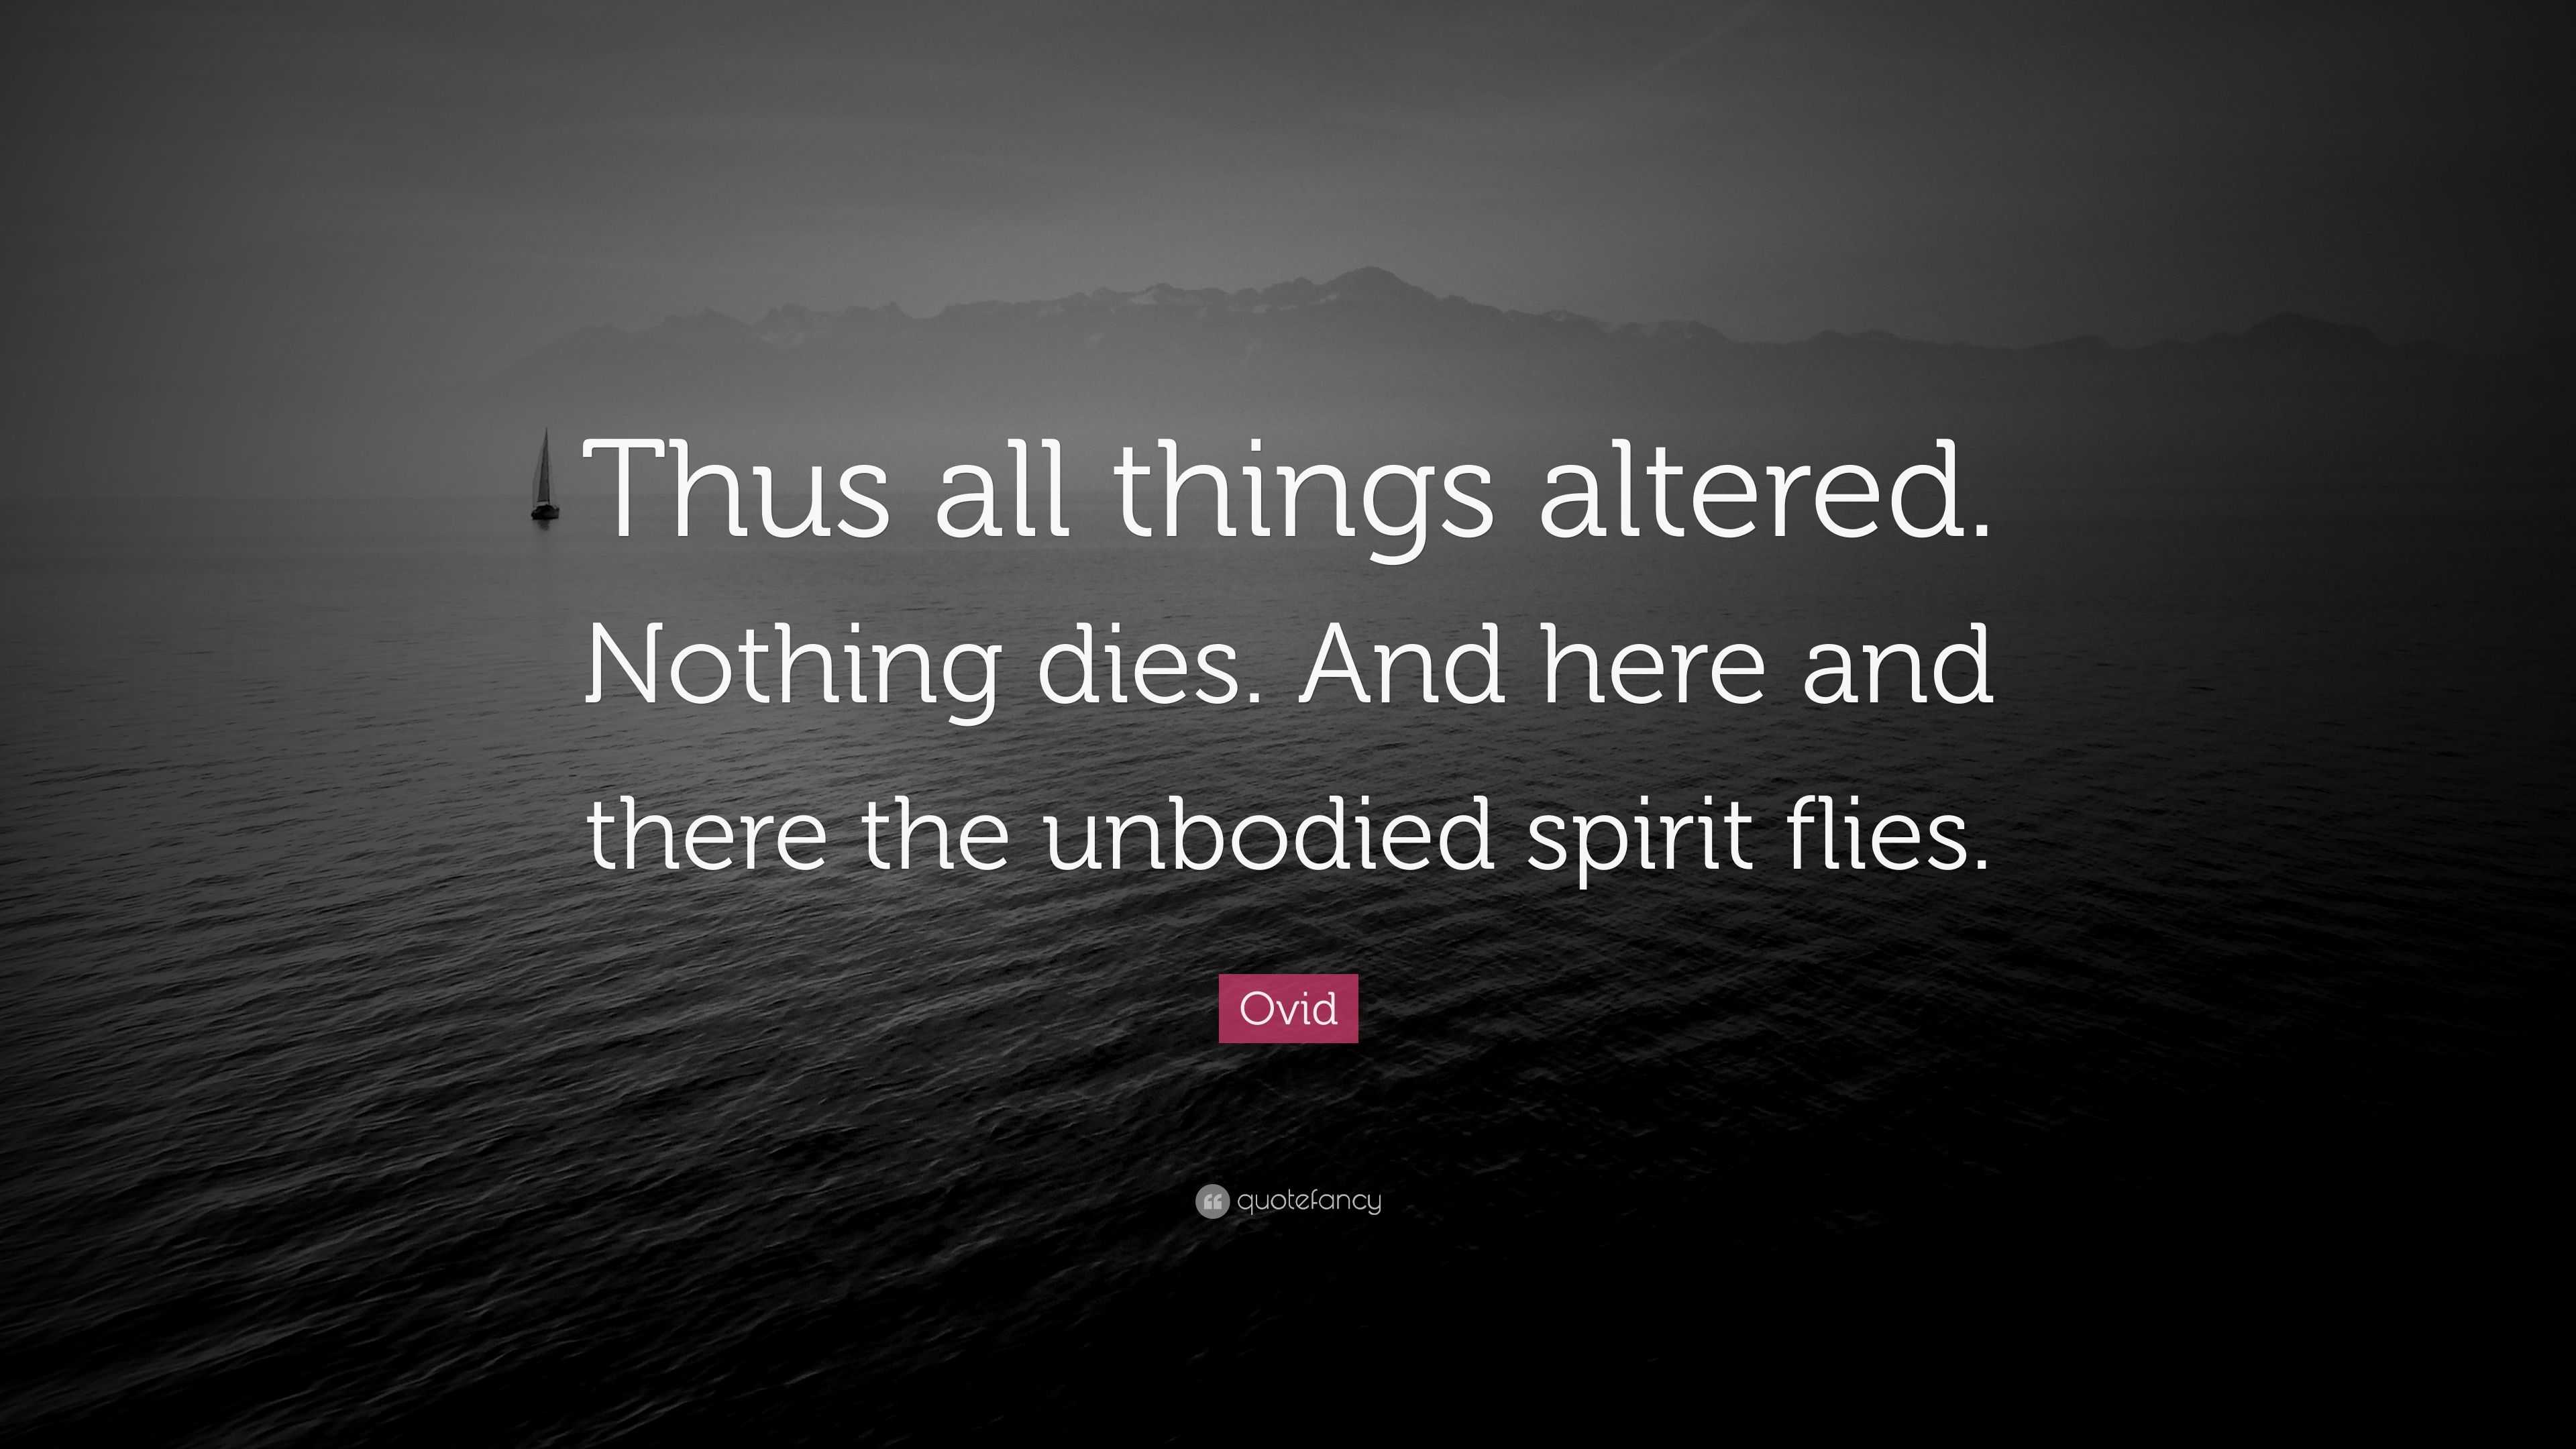 Ovid Quote “Thus all things altered. Nothing dies. And here and there